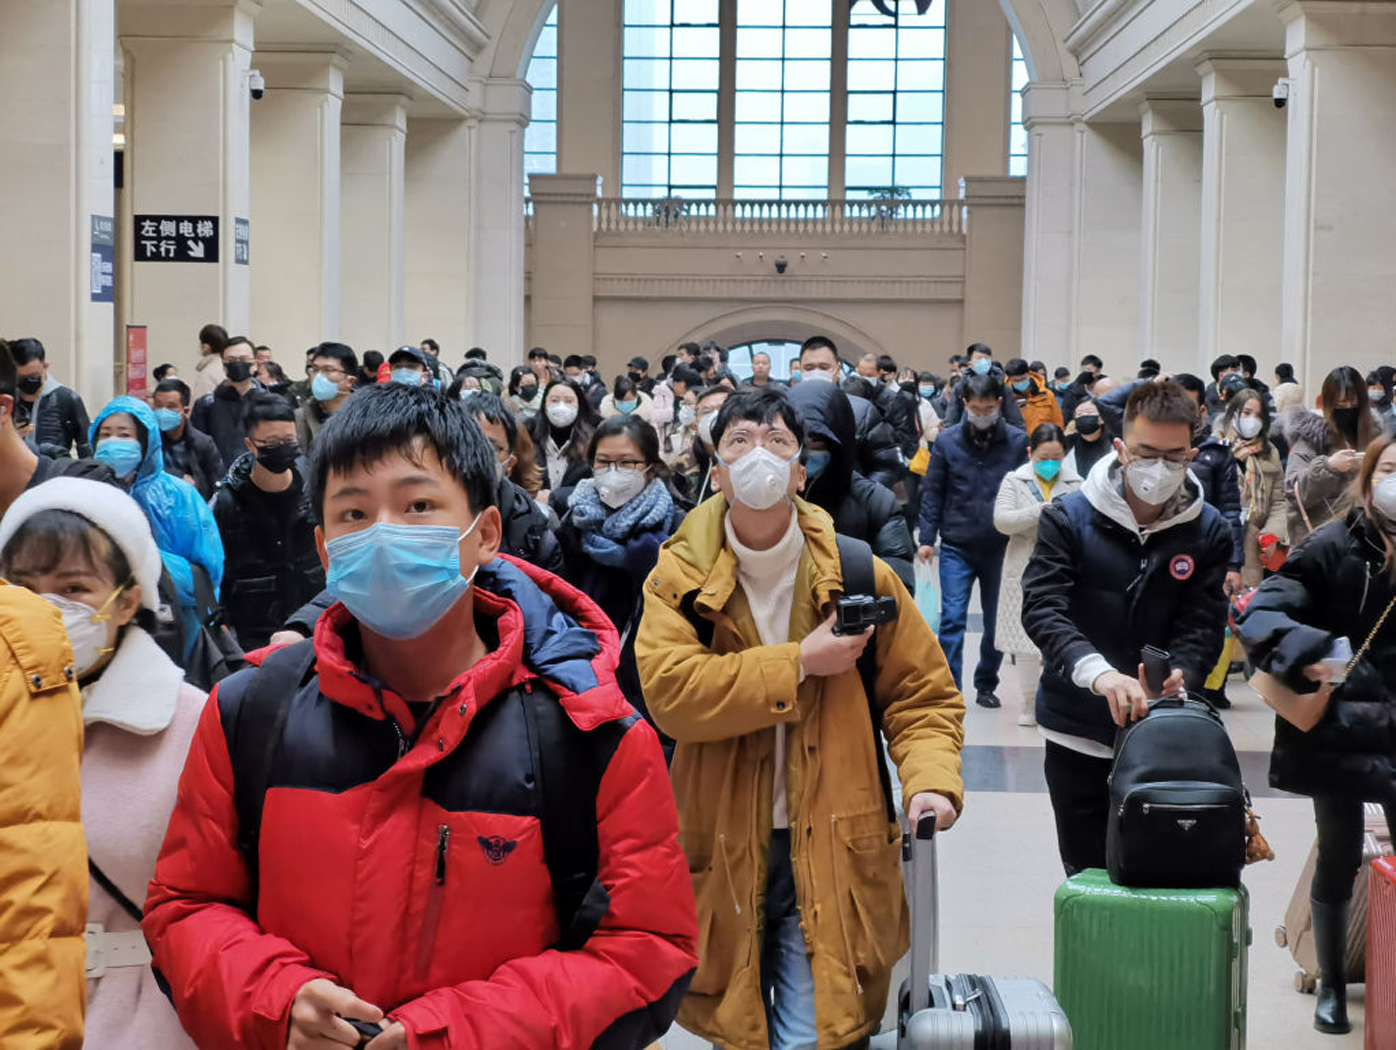 People wear face masks as they wait at Hankou Railway Station on January 22, 2020 in Wuhan, China. 